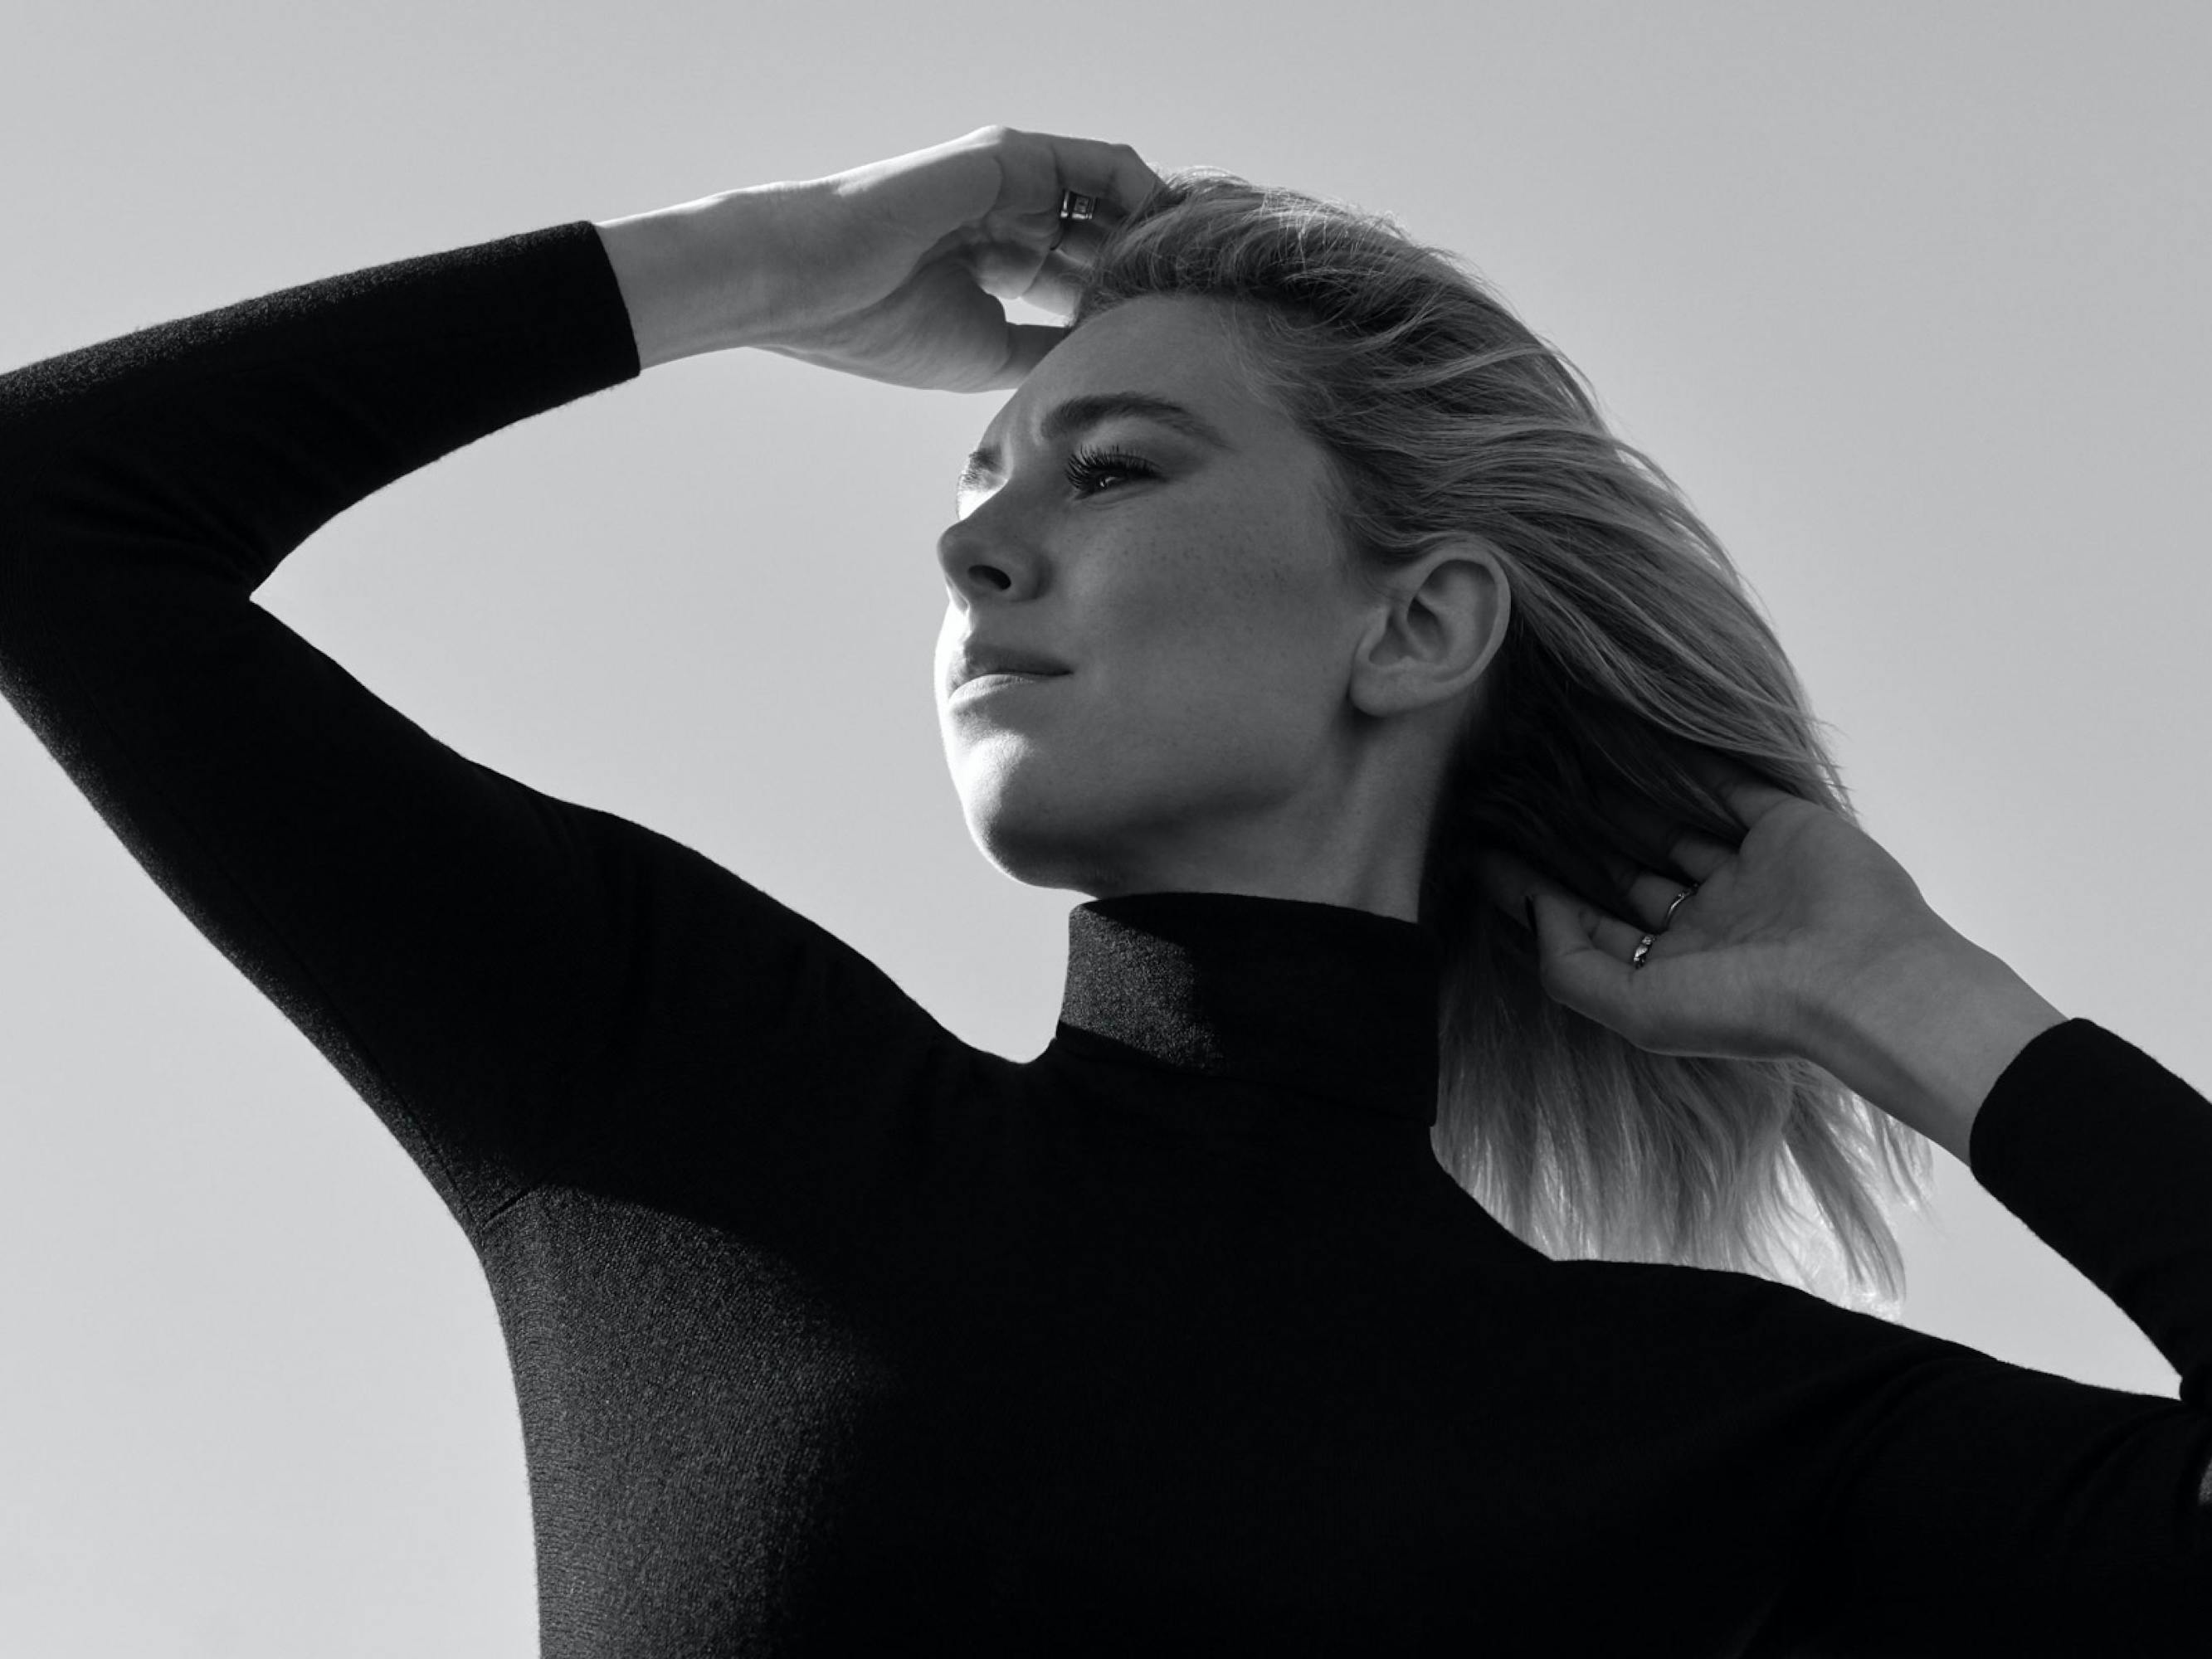 Vanessa Kirby poses in profile, arms akimbo. The sun hits her face and her hair blows in the breeze.